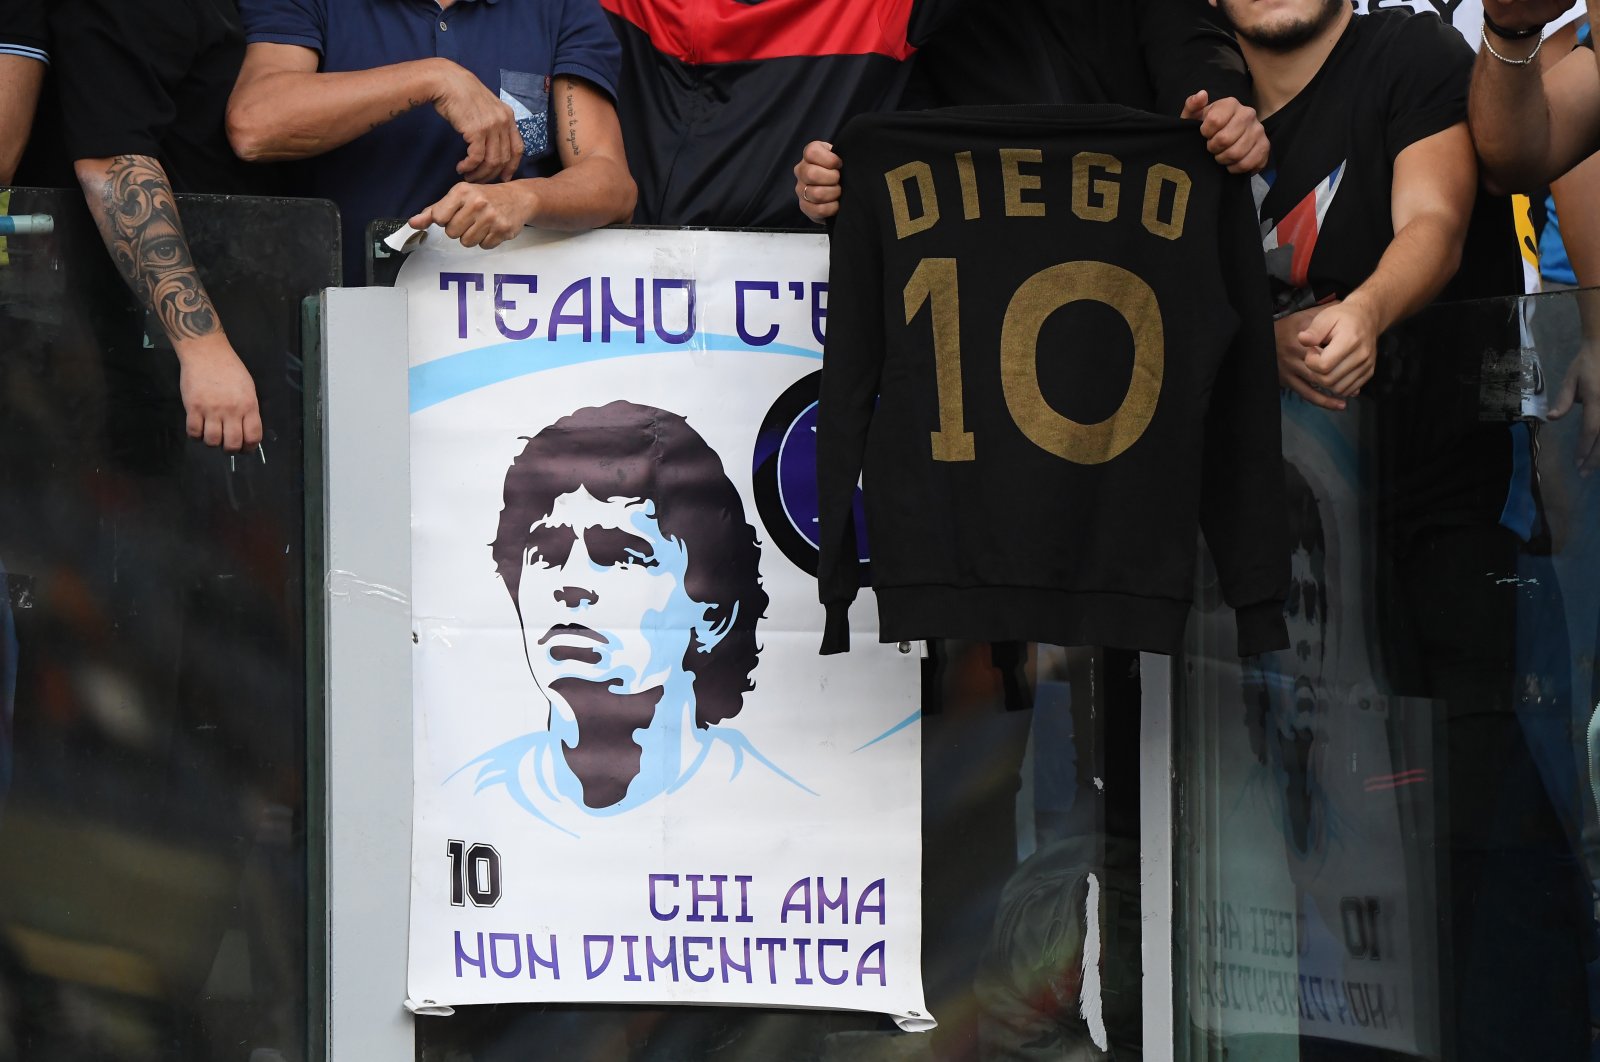 Napoli fans display a banner and shirt in honor of former player Diego Maradona before a Serie A match against AS Roma at Stadio Olimpico, Rome, Italy, Oct. 24, 2021. (Reuters Photo)